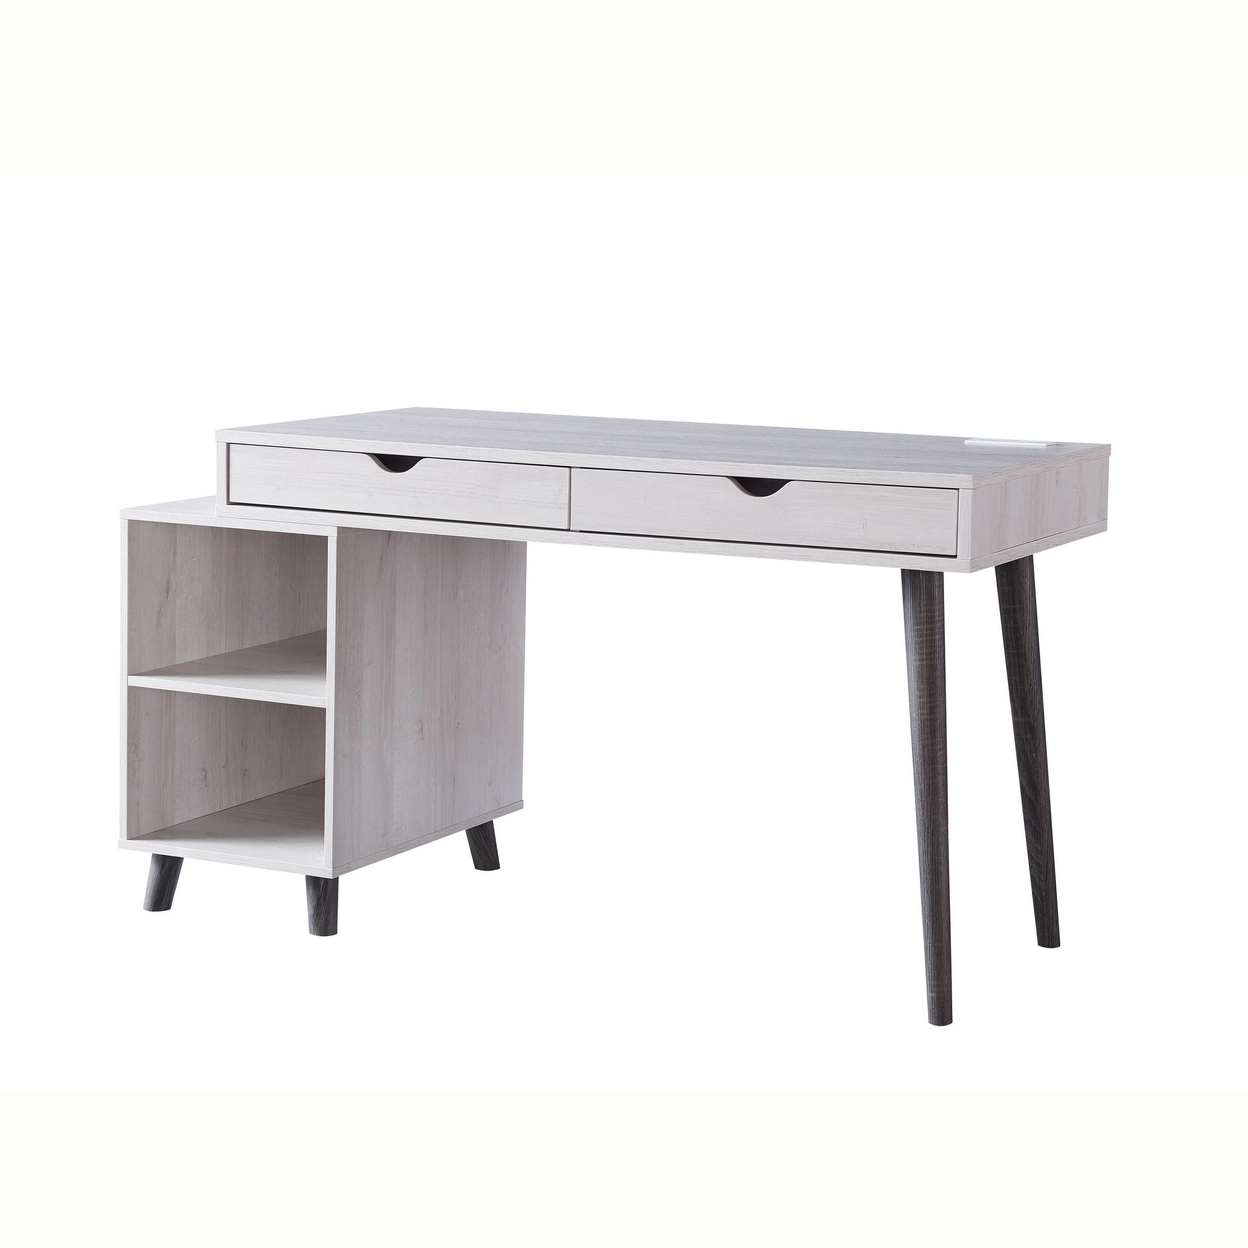 2 Drawer Wooden Desk With 2 Compartments And Splayed Legs, Gray- Saltoro Sherpi